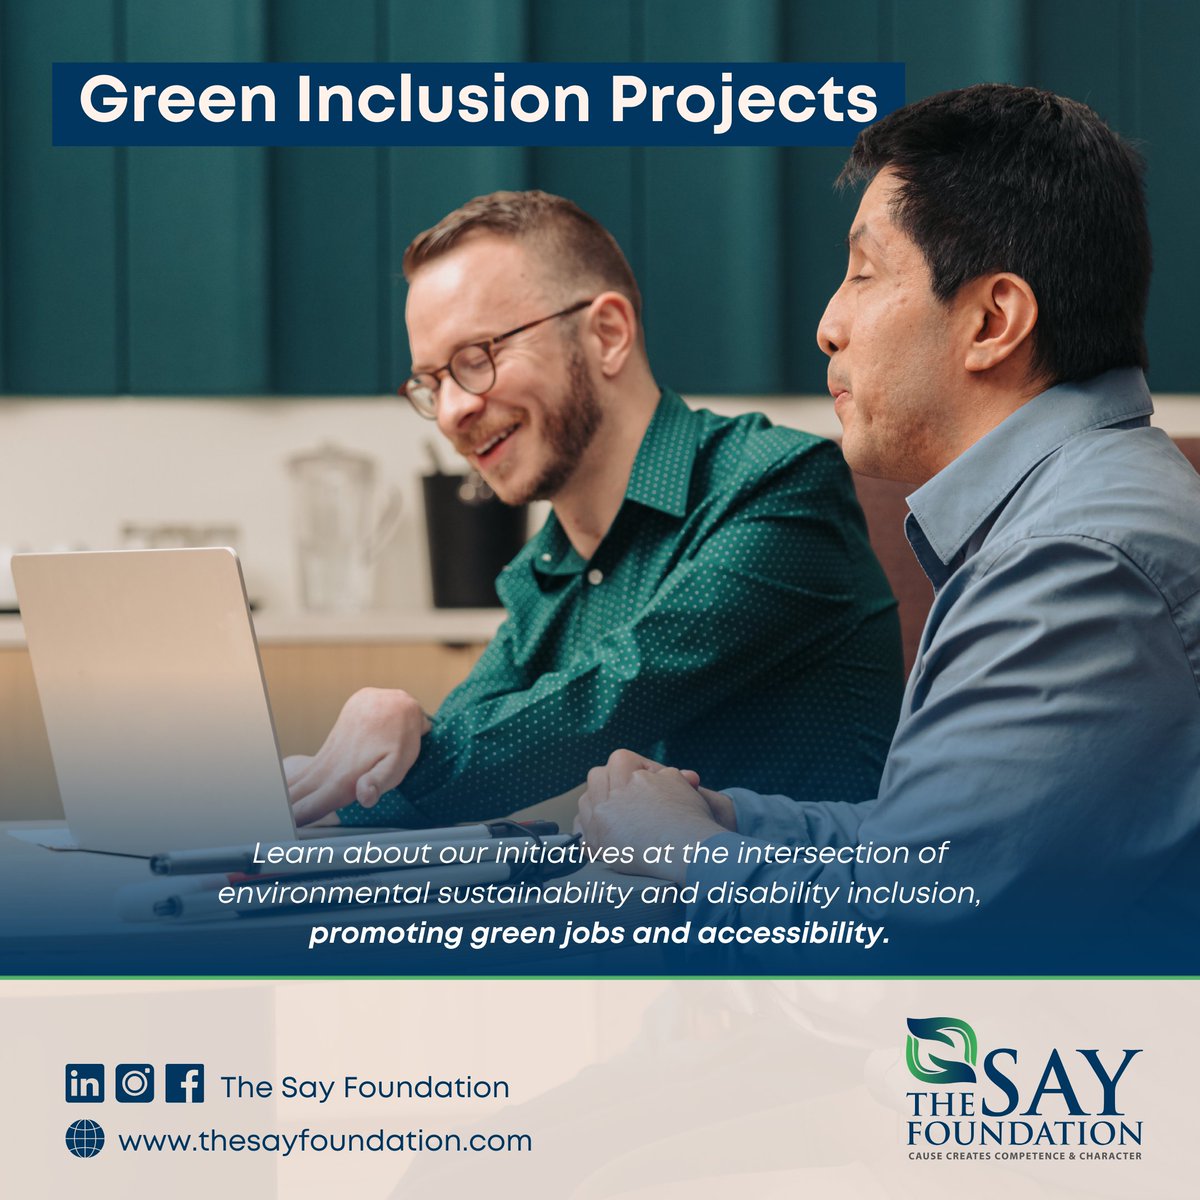 Green is the future, and inclusion is the path. 
Discover our green initiatives today!

#greenjobs #sustainability #inclusion #ecofriendly #environmentalimpact #disabilitysupport #thesayfoundation